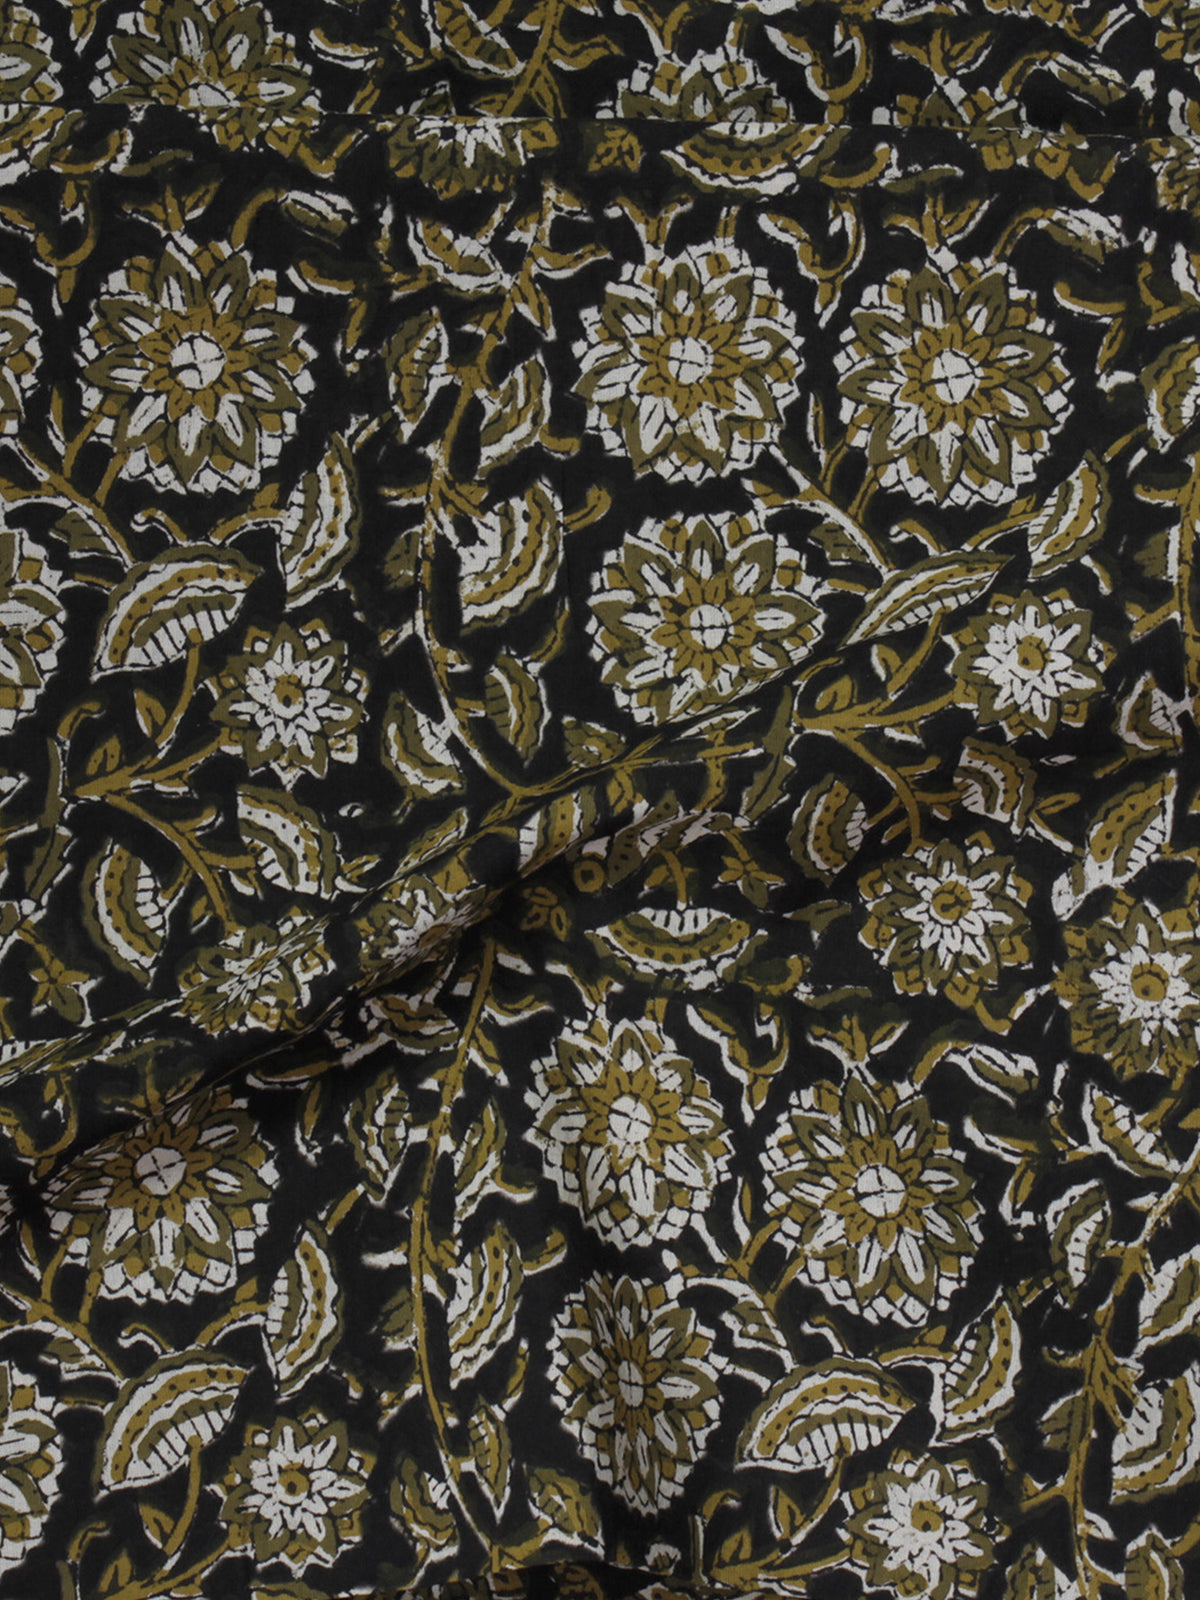 Black Ivory Olive Green Hand Block Printed Cotton Fabric Per Meter - F001F580